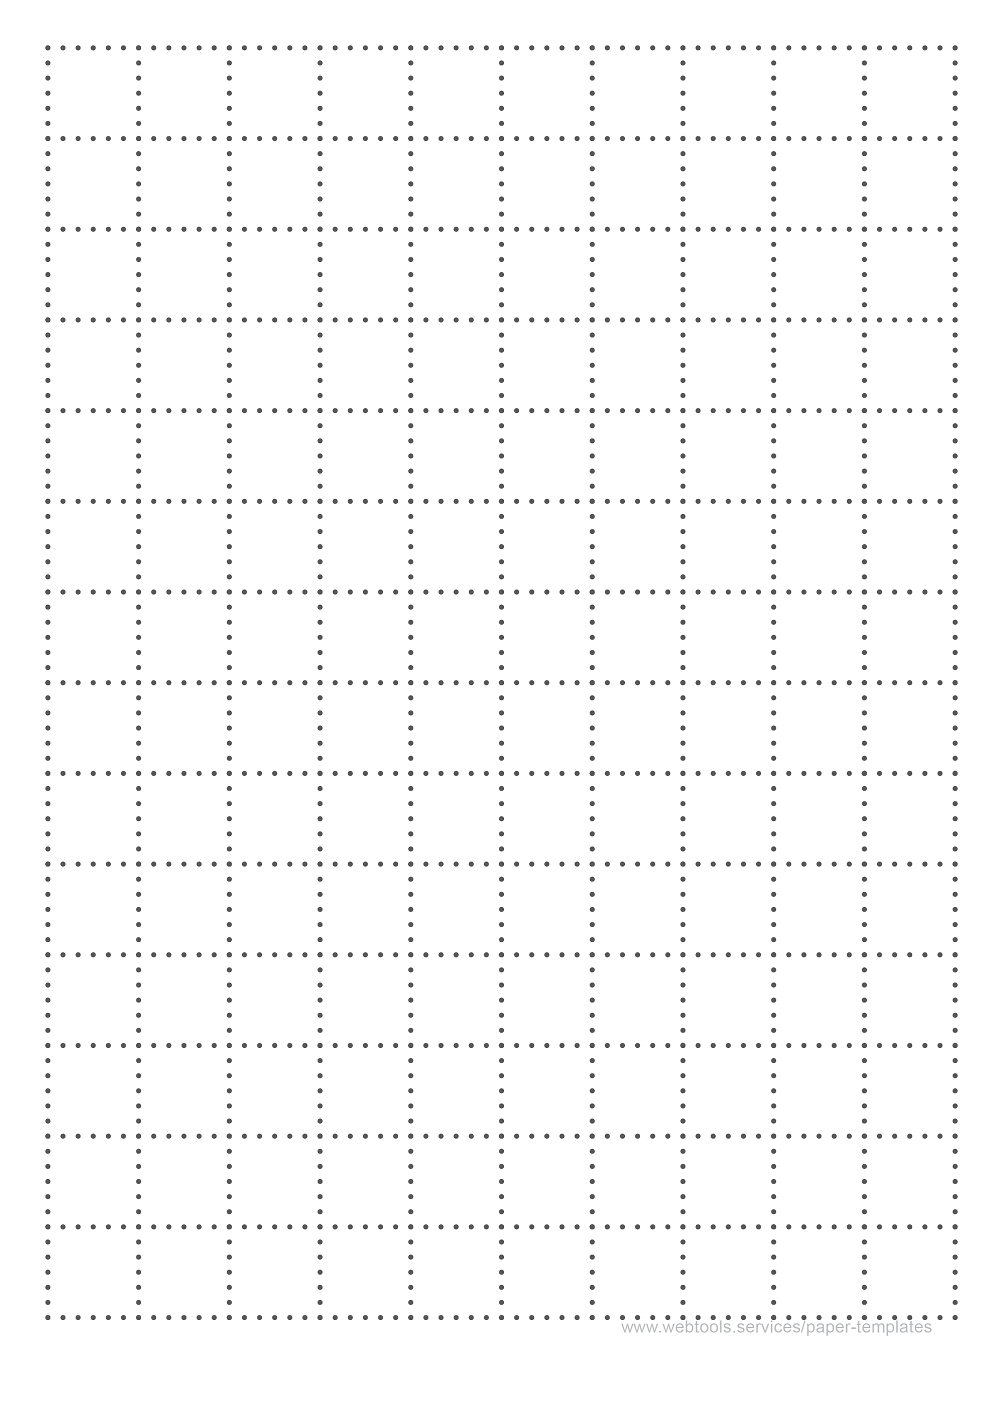 3/4 Inch Black Dotted Graph Paper